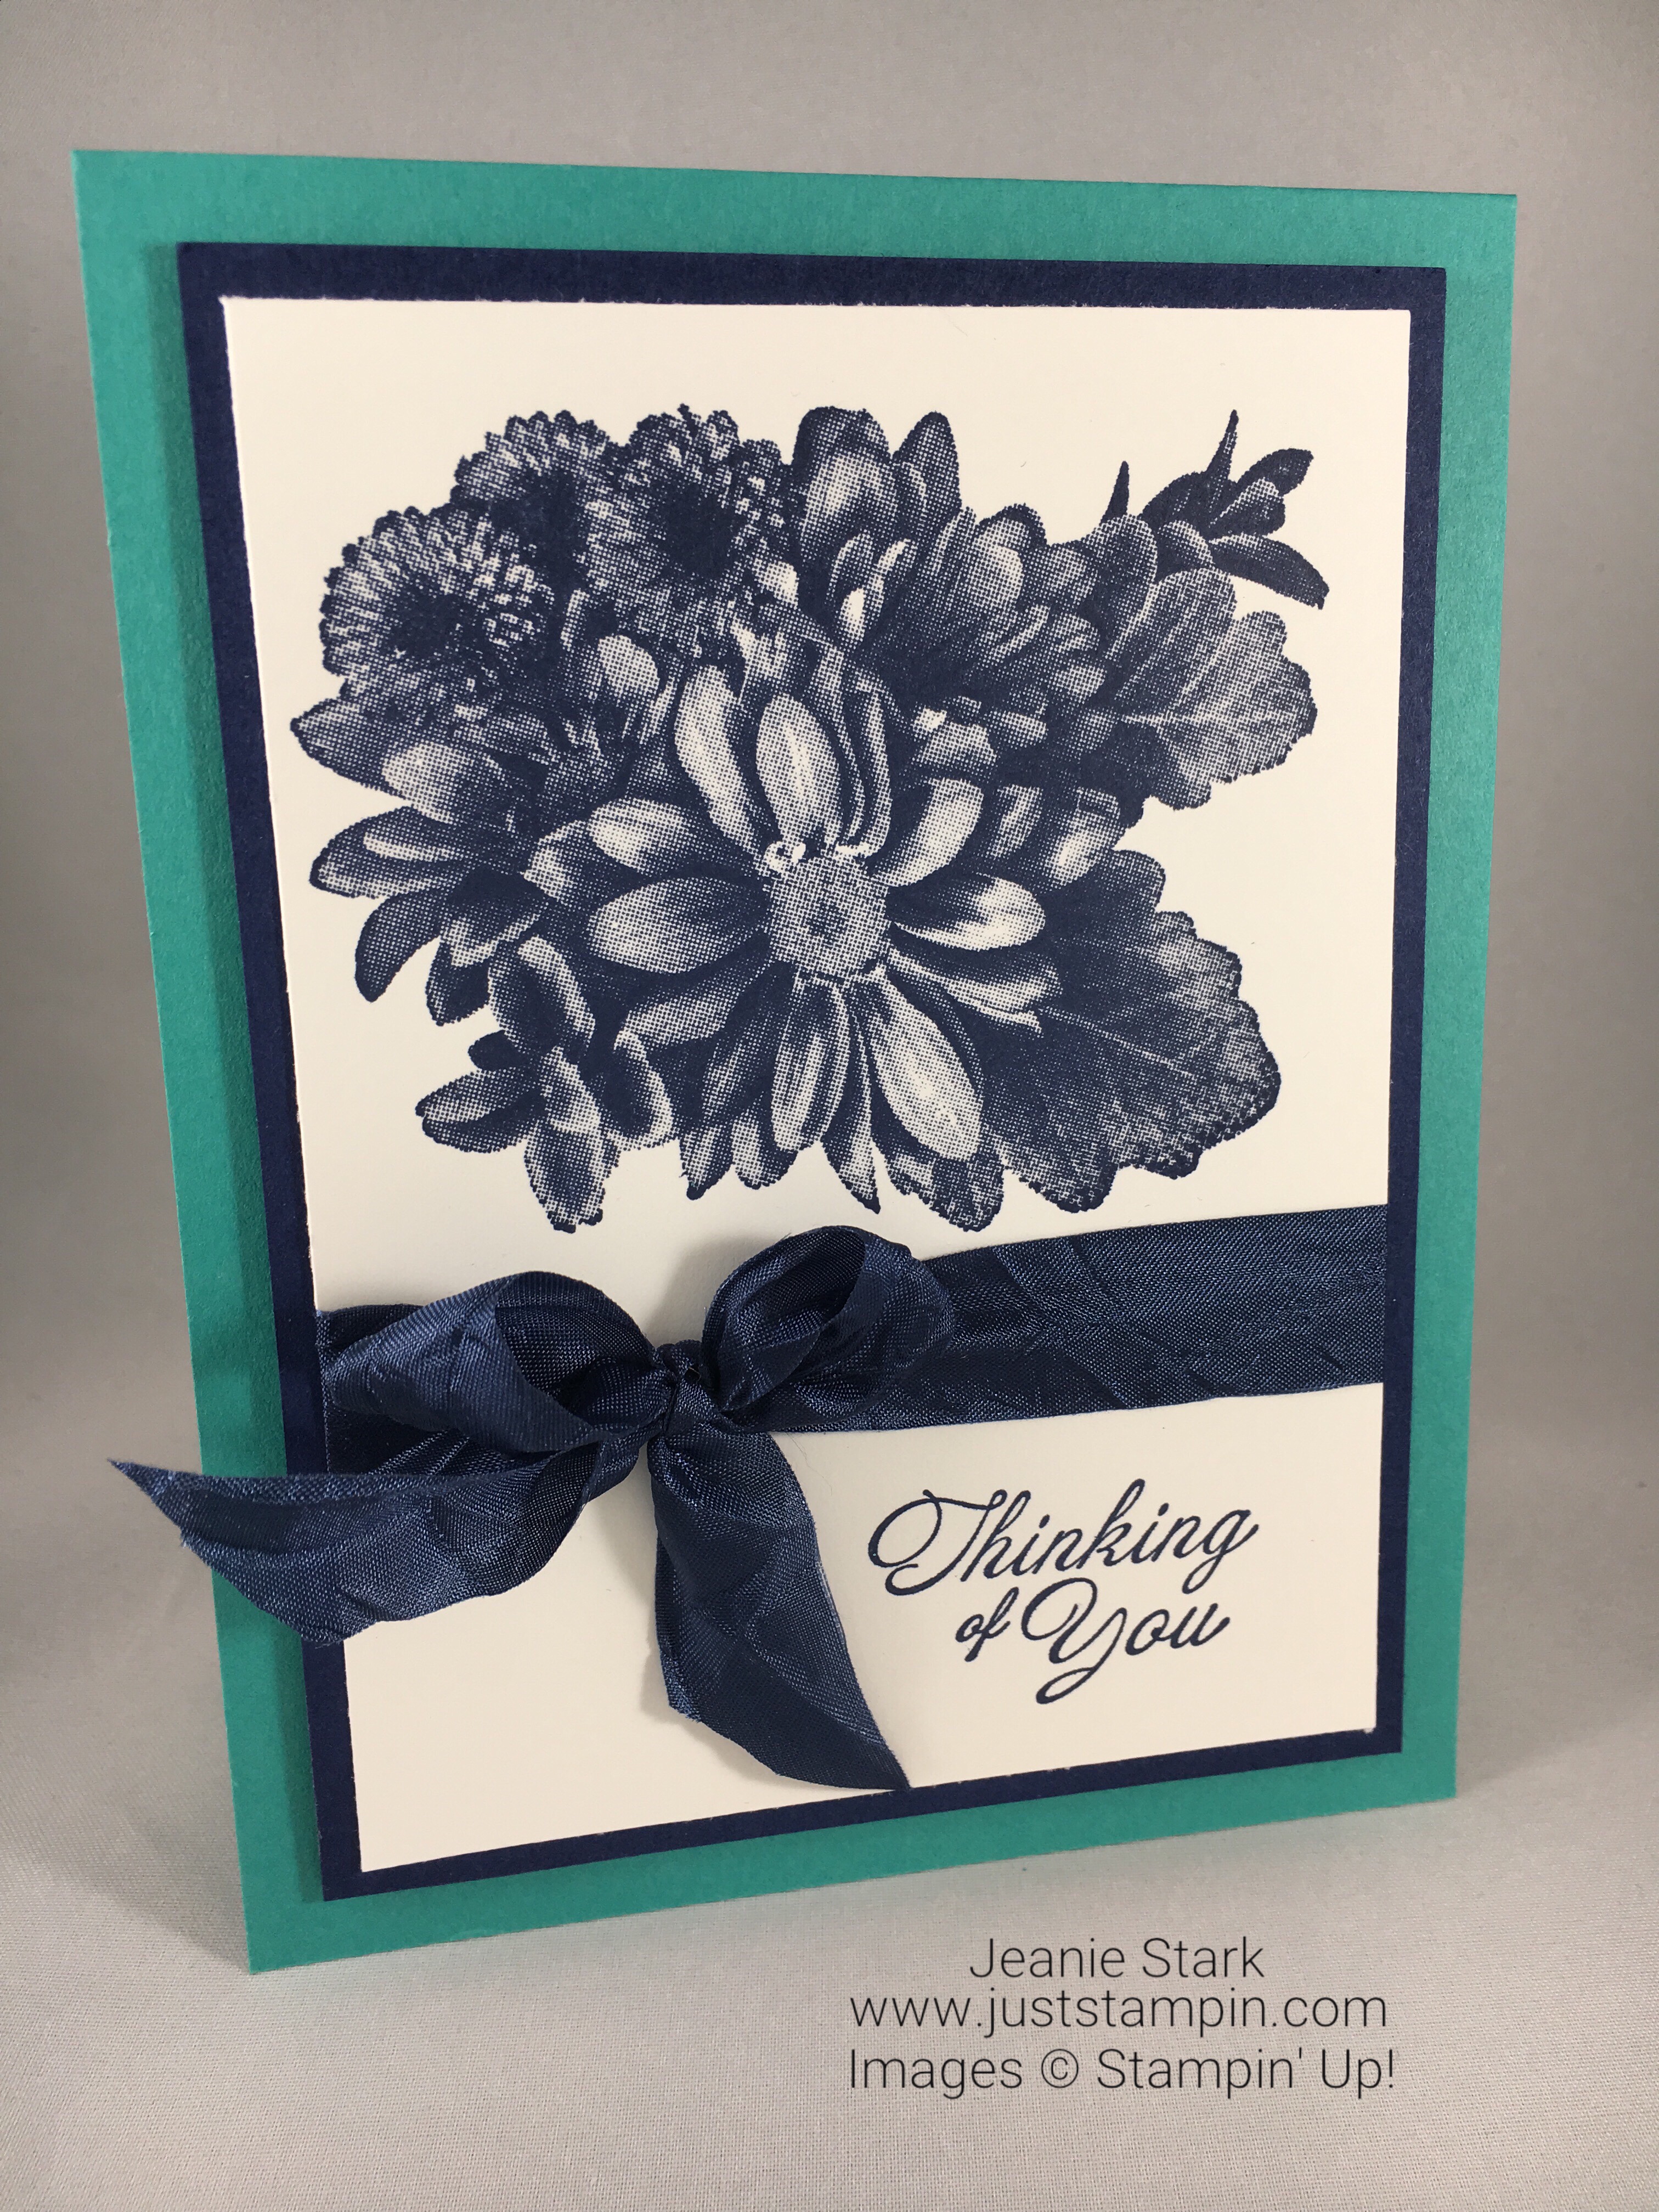 Stampin Up Heartfelt Blooms Thinking of You card idea - Jeanie Stark StampinUp